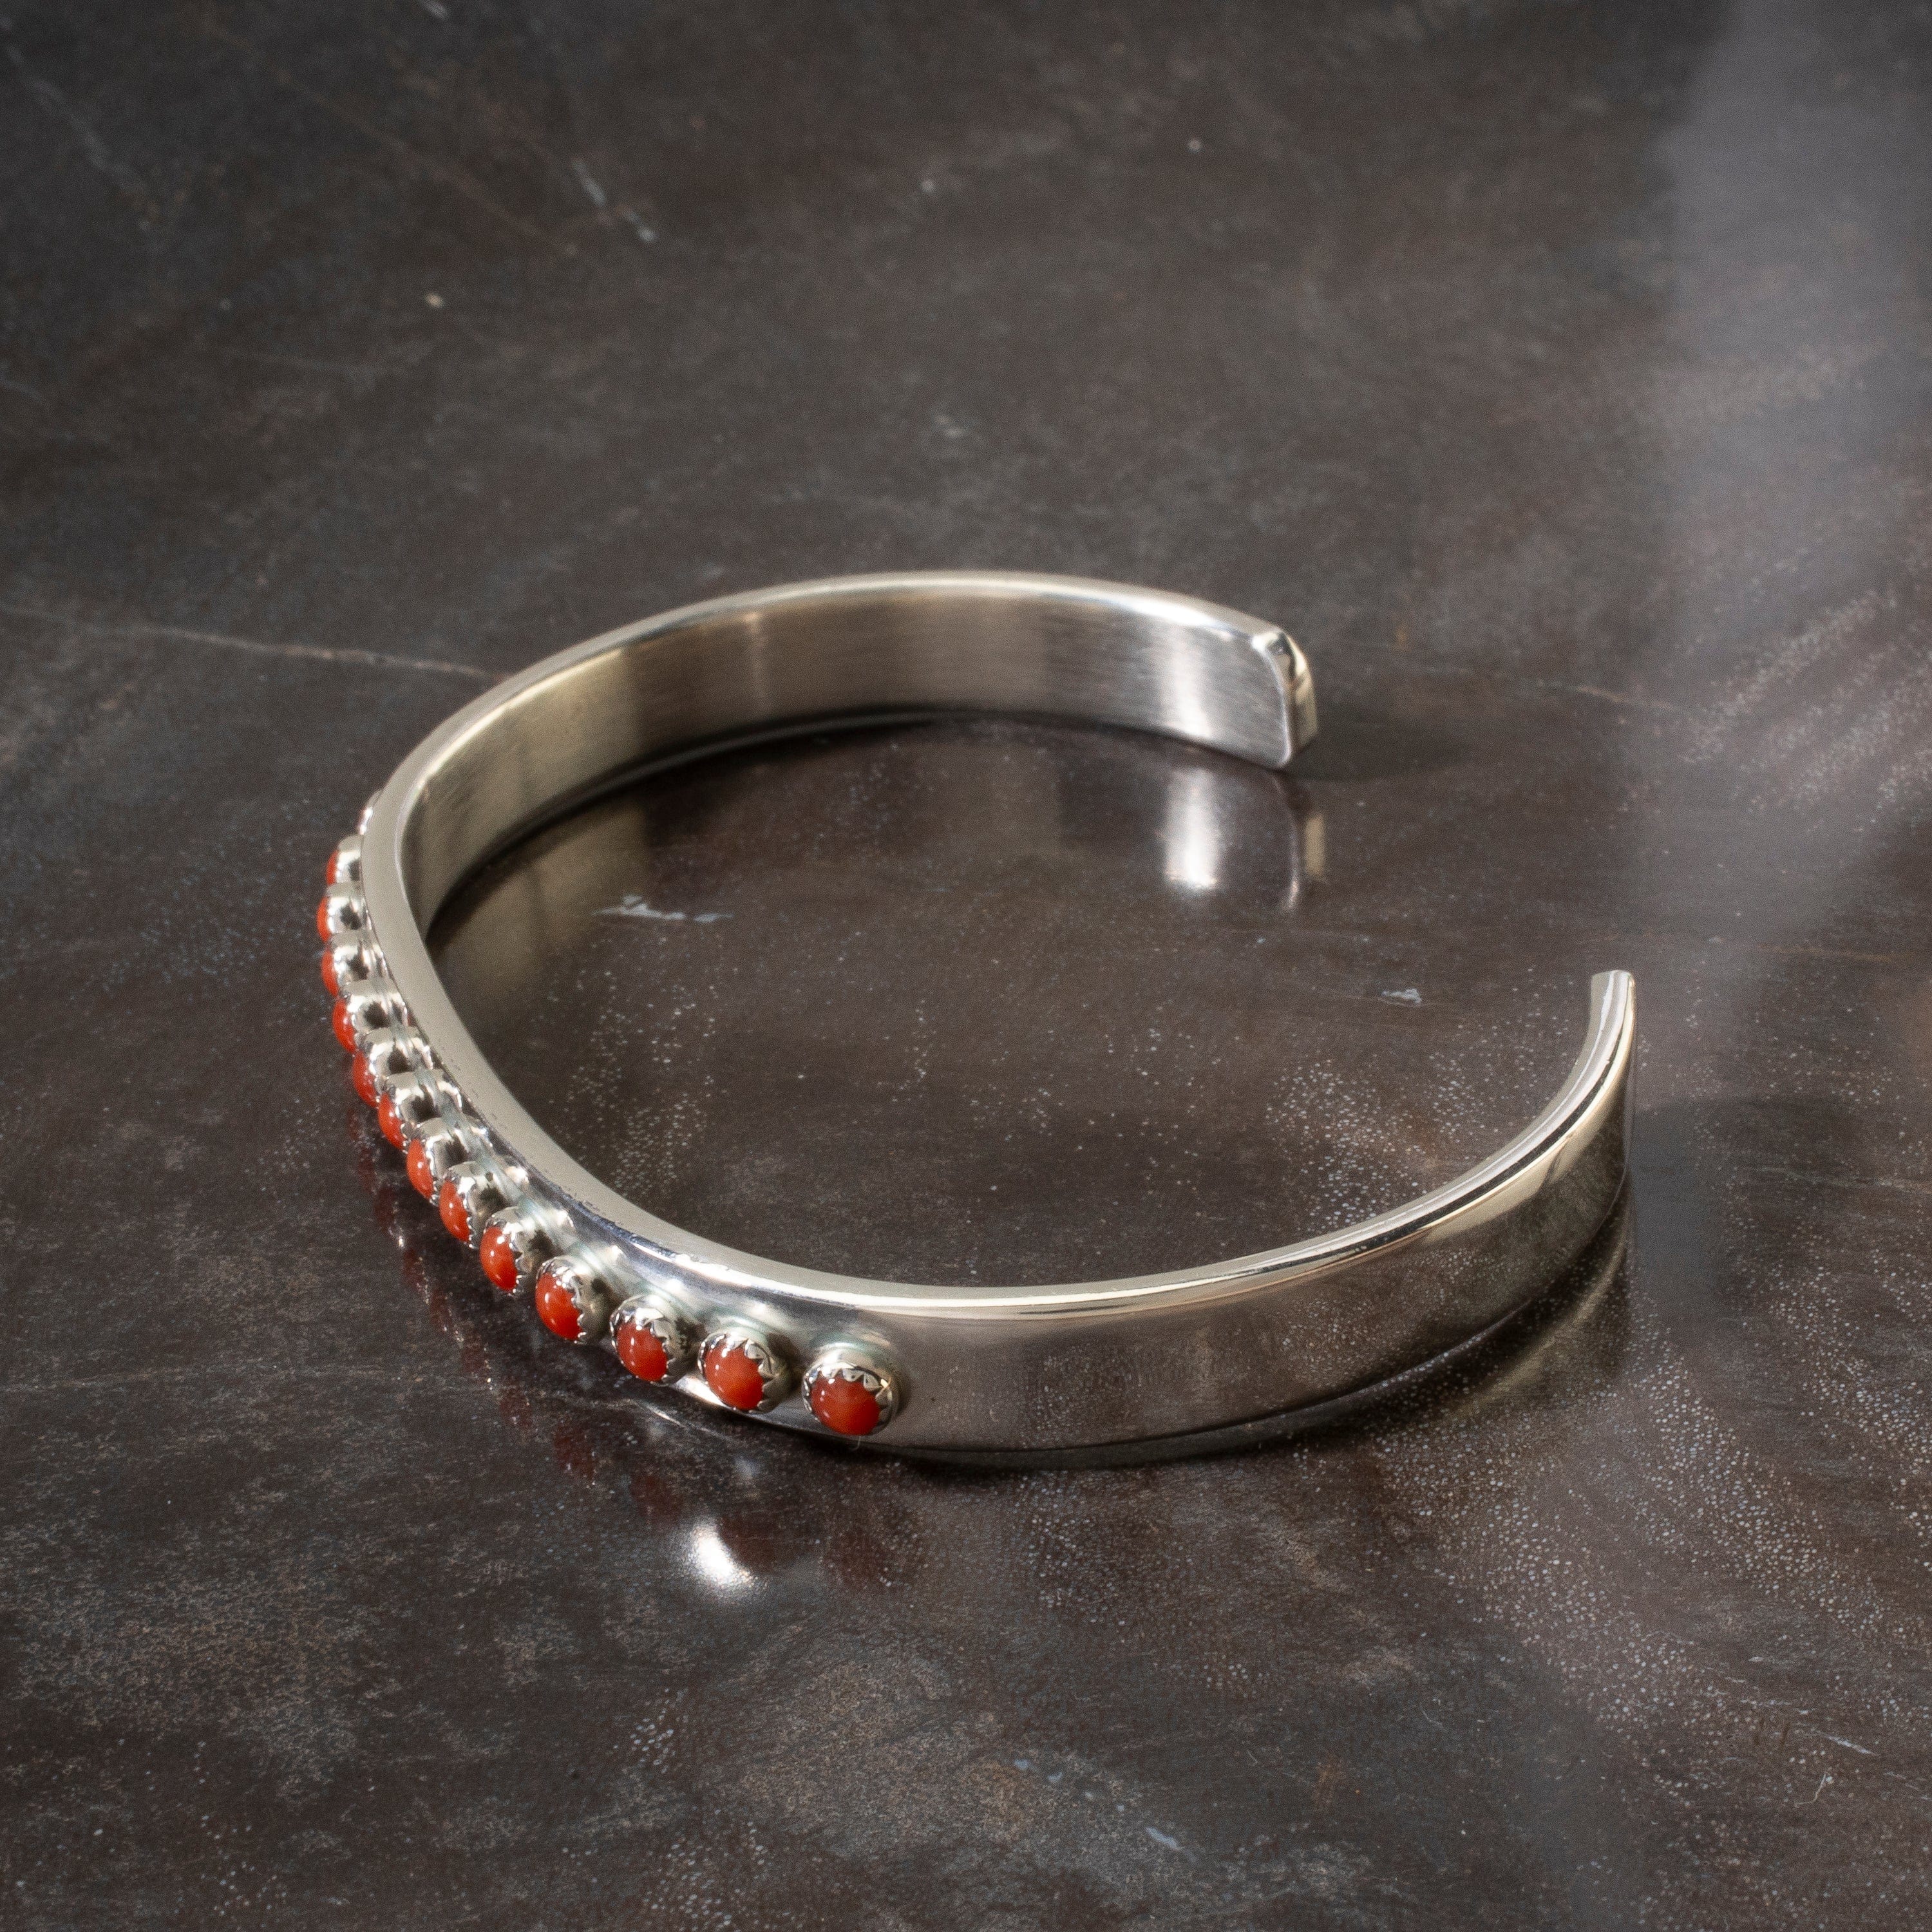 Kalifano Native American Jewelry Patrick Yazzie Navajo Red Coral USA Native American Made 925 Sterling Silver Cuff NAB800.008